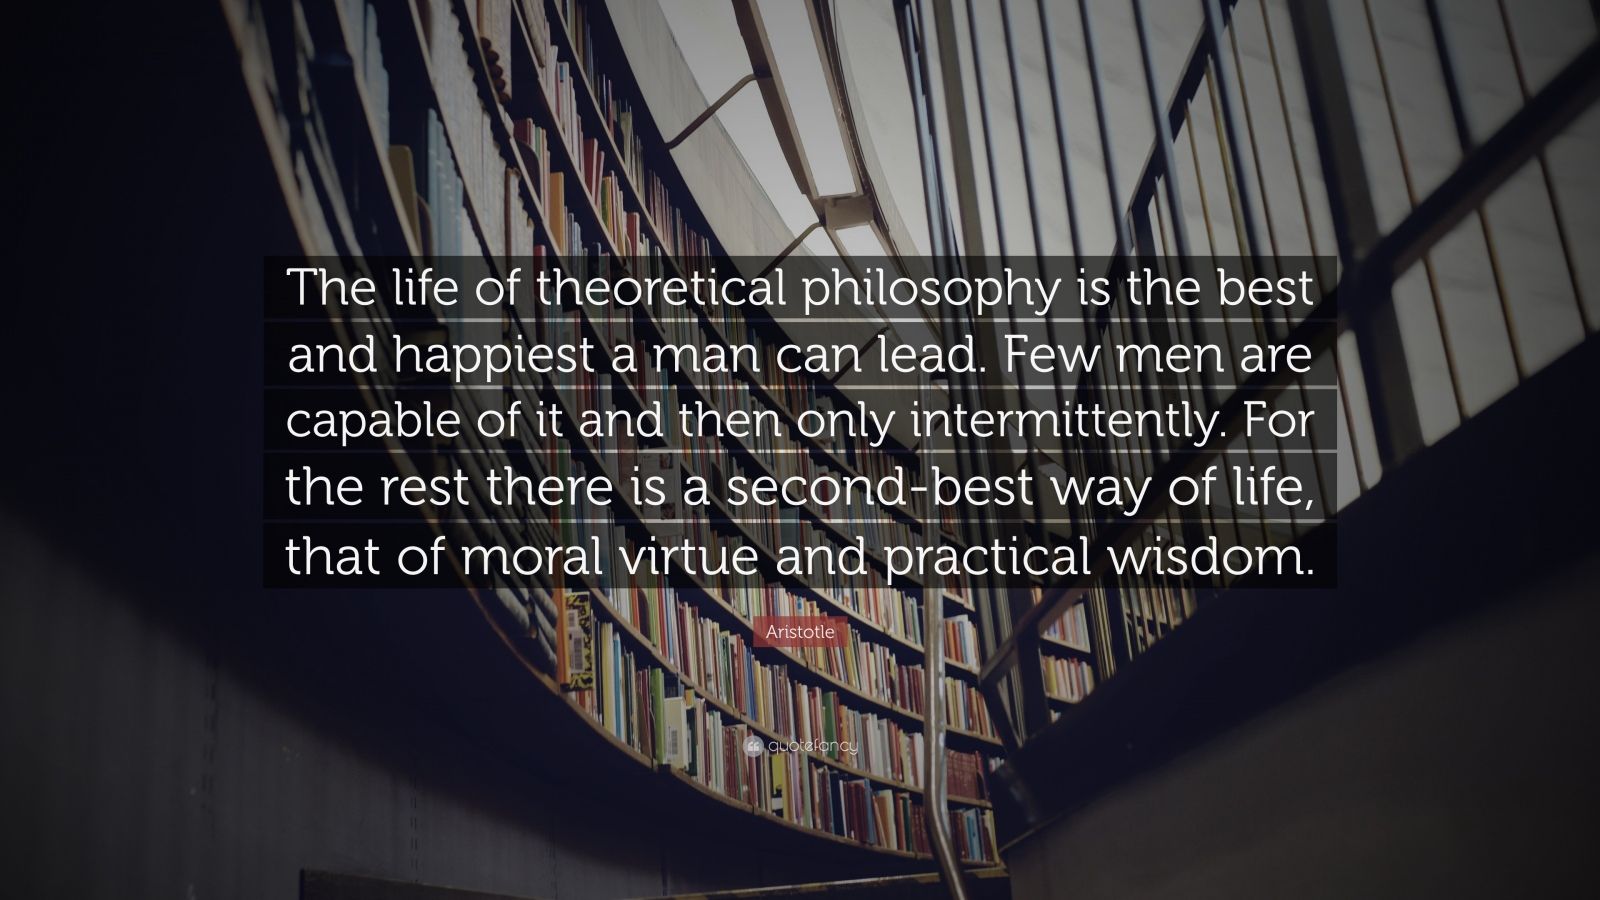 Aristotle Quote: “The life of theoretical philosophy is the best and